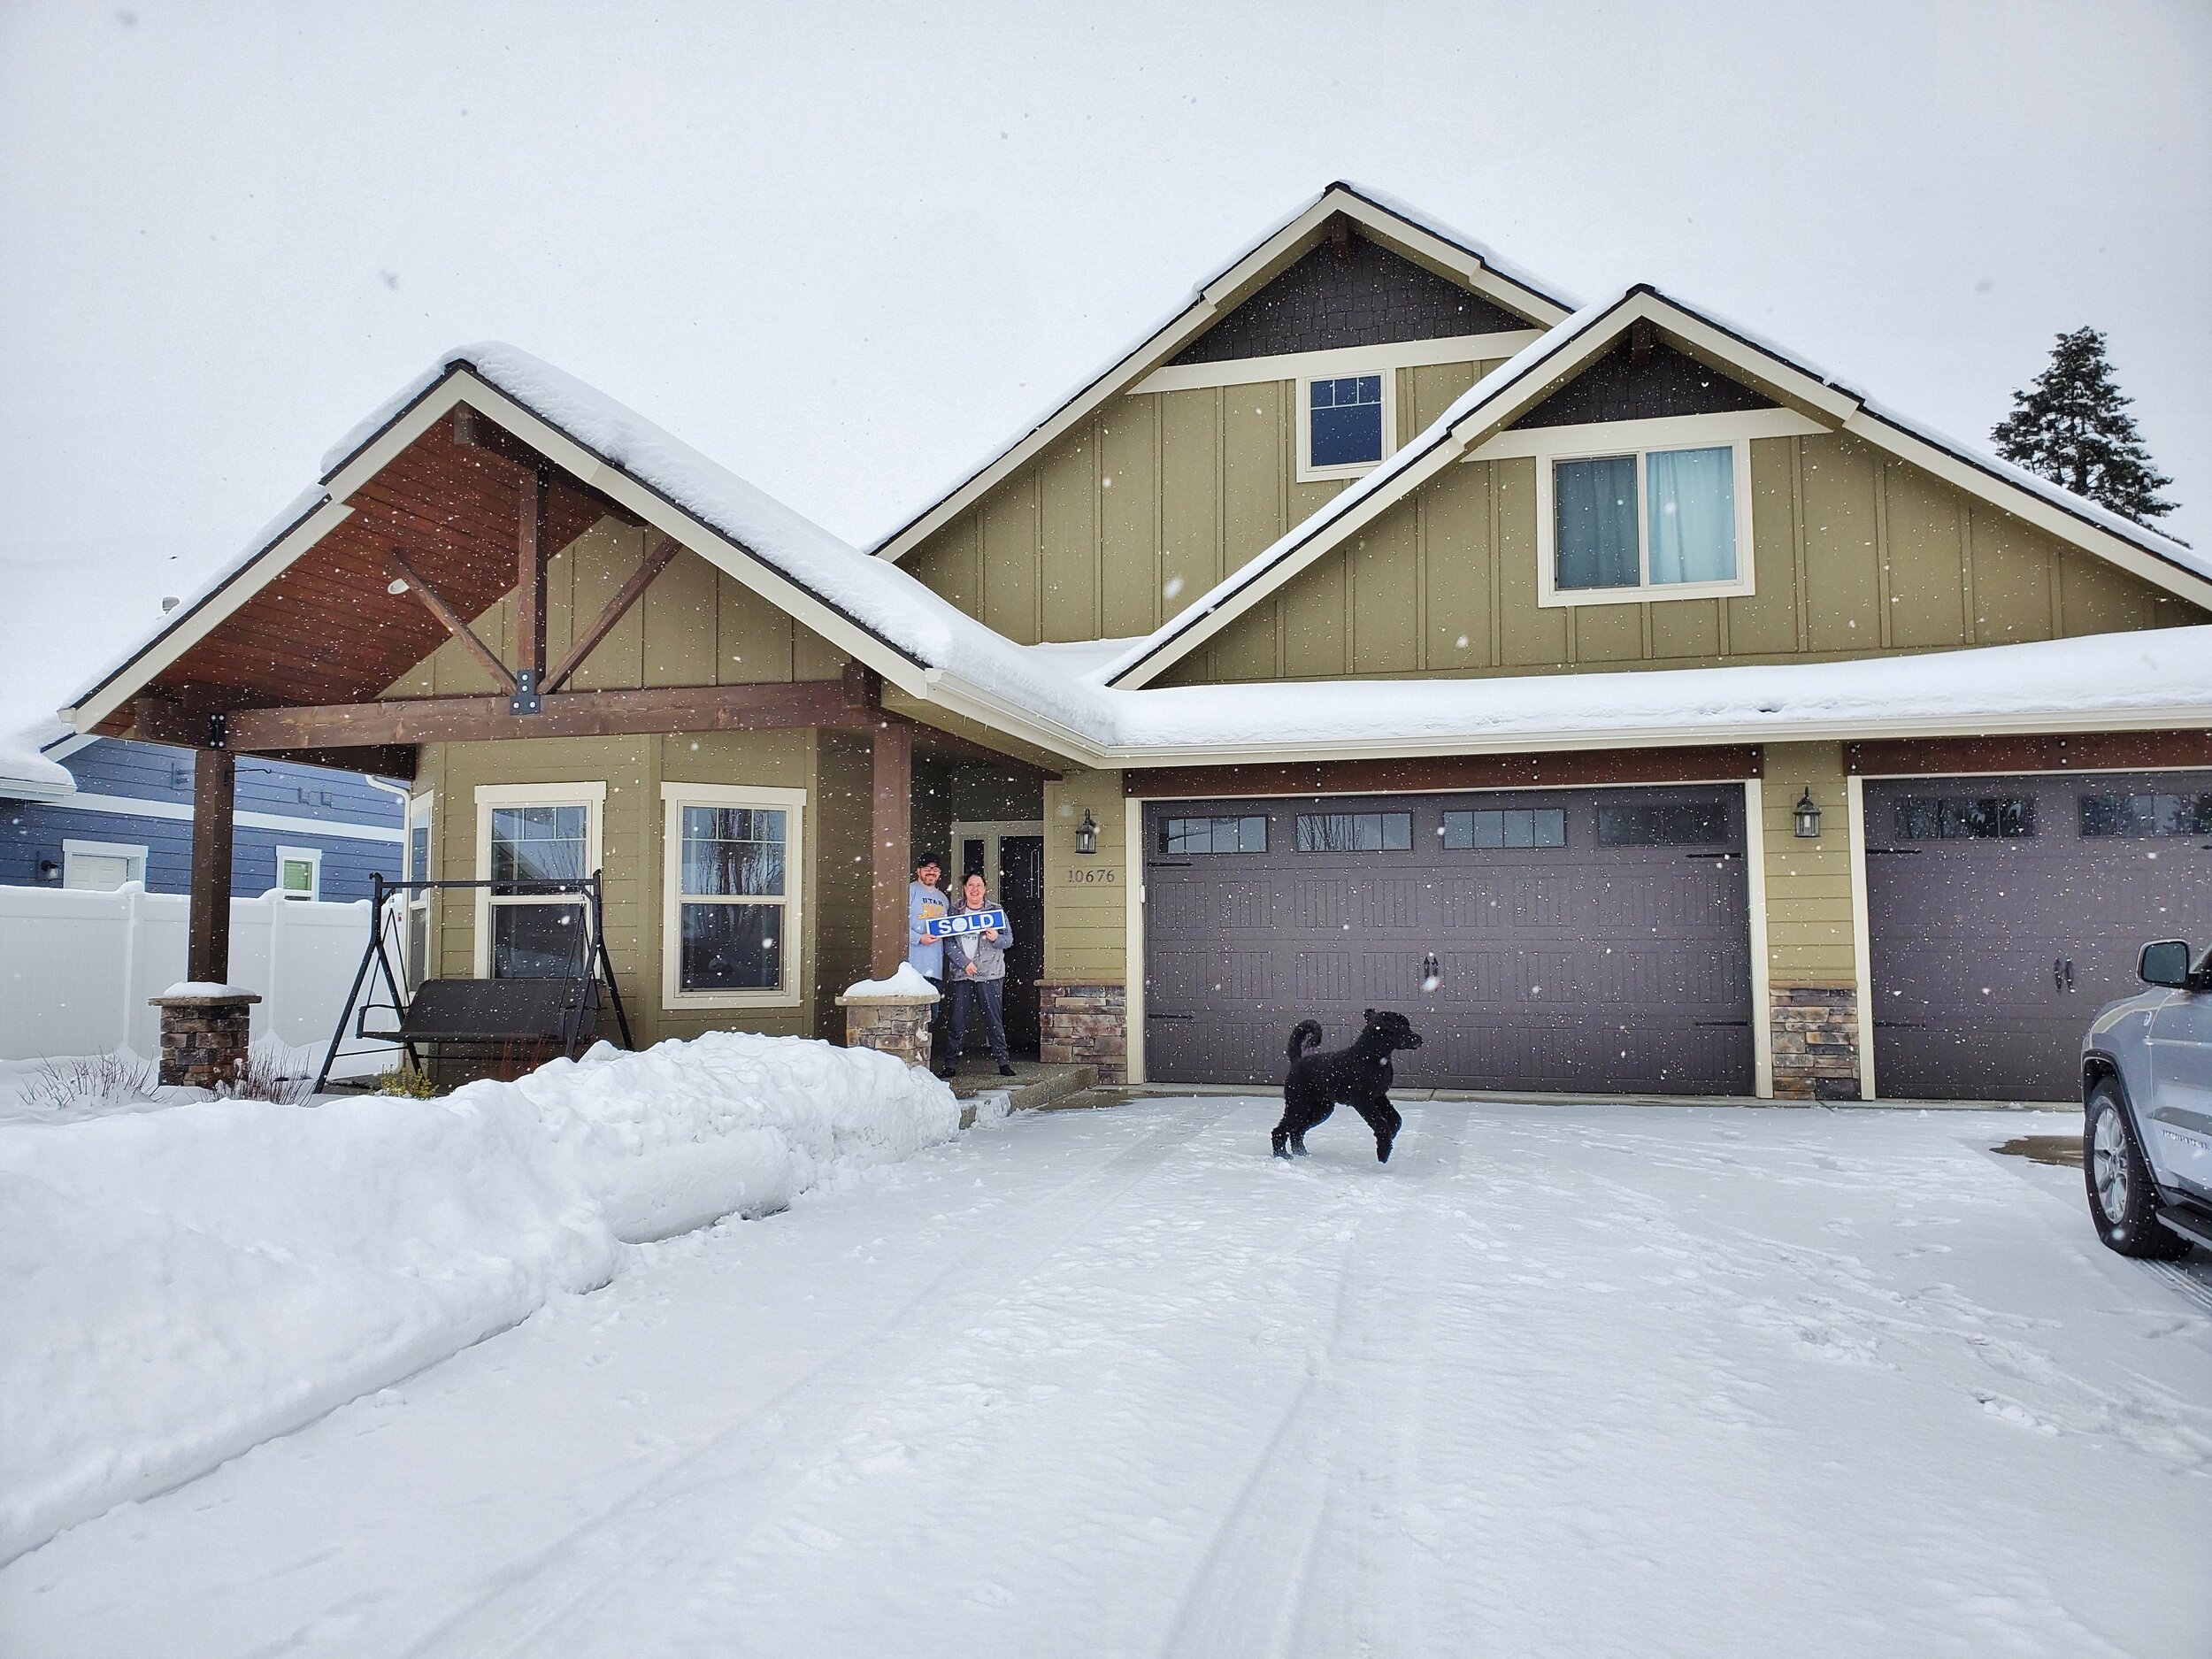  Craftsman style home with dog and couple out front in the snow. 